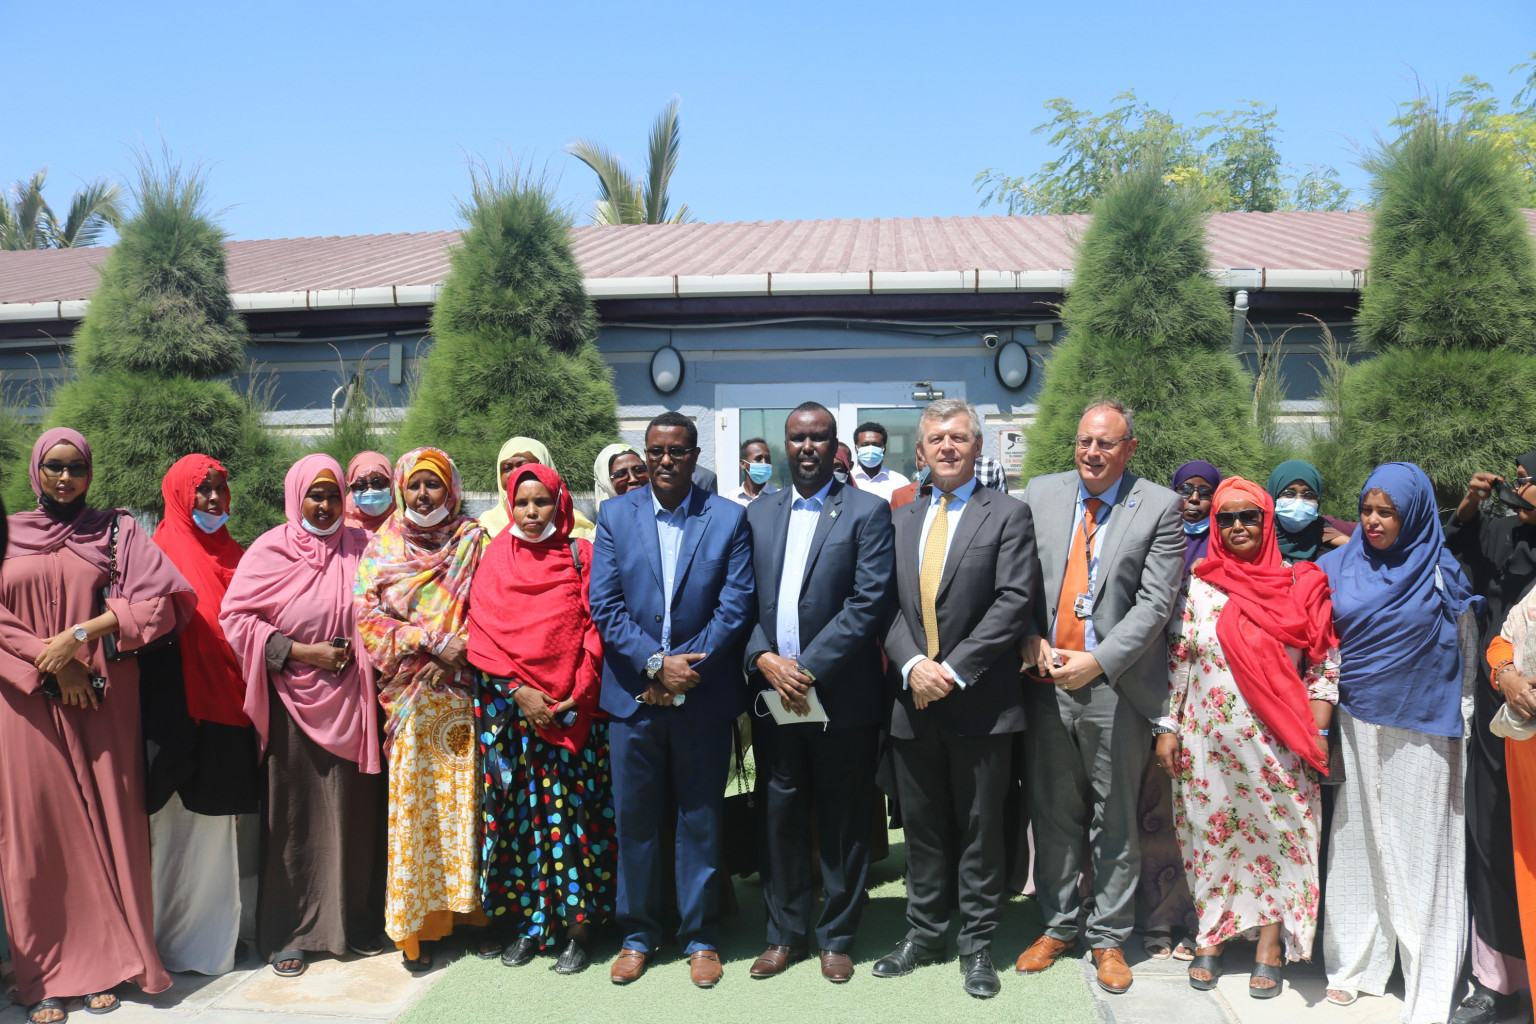 National Action Plan for Women in the Somali Maritime Sector proceeding